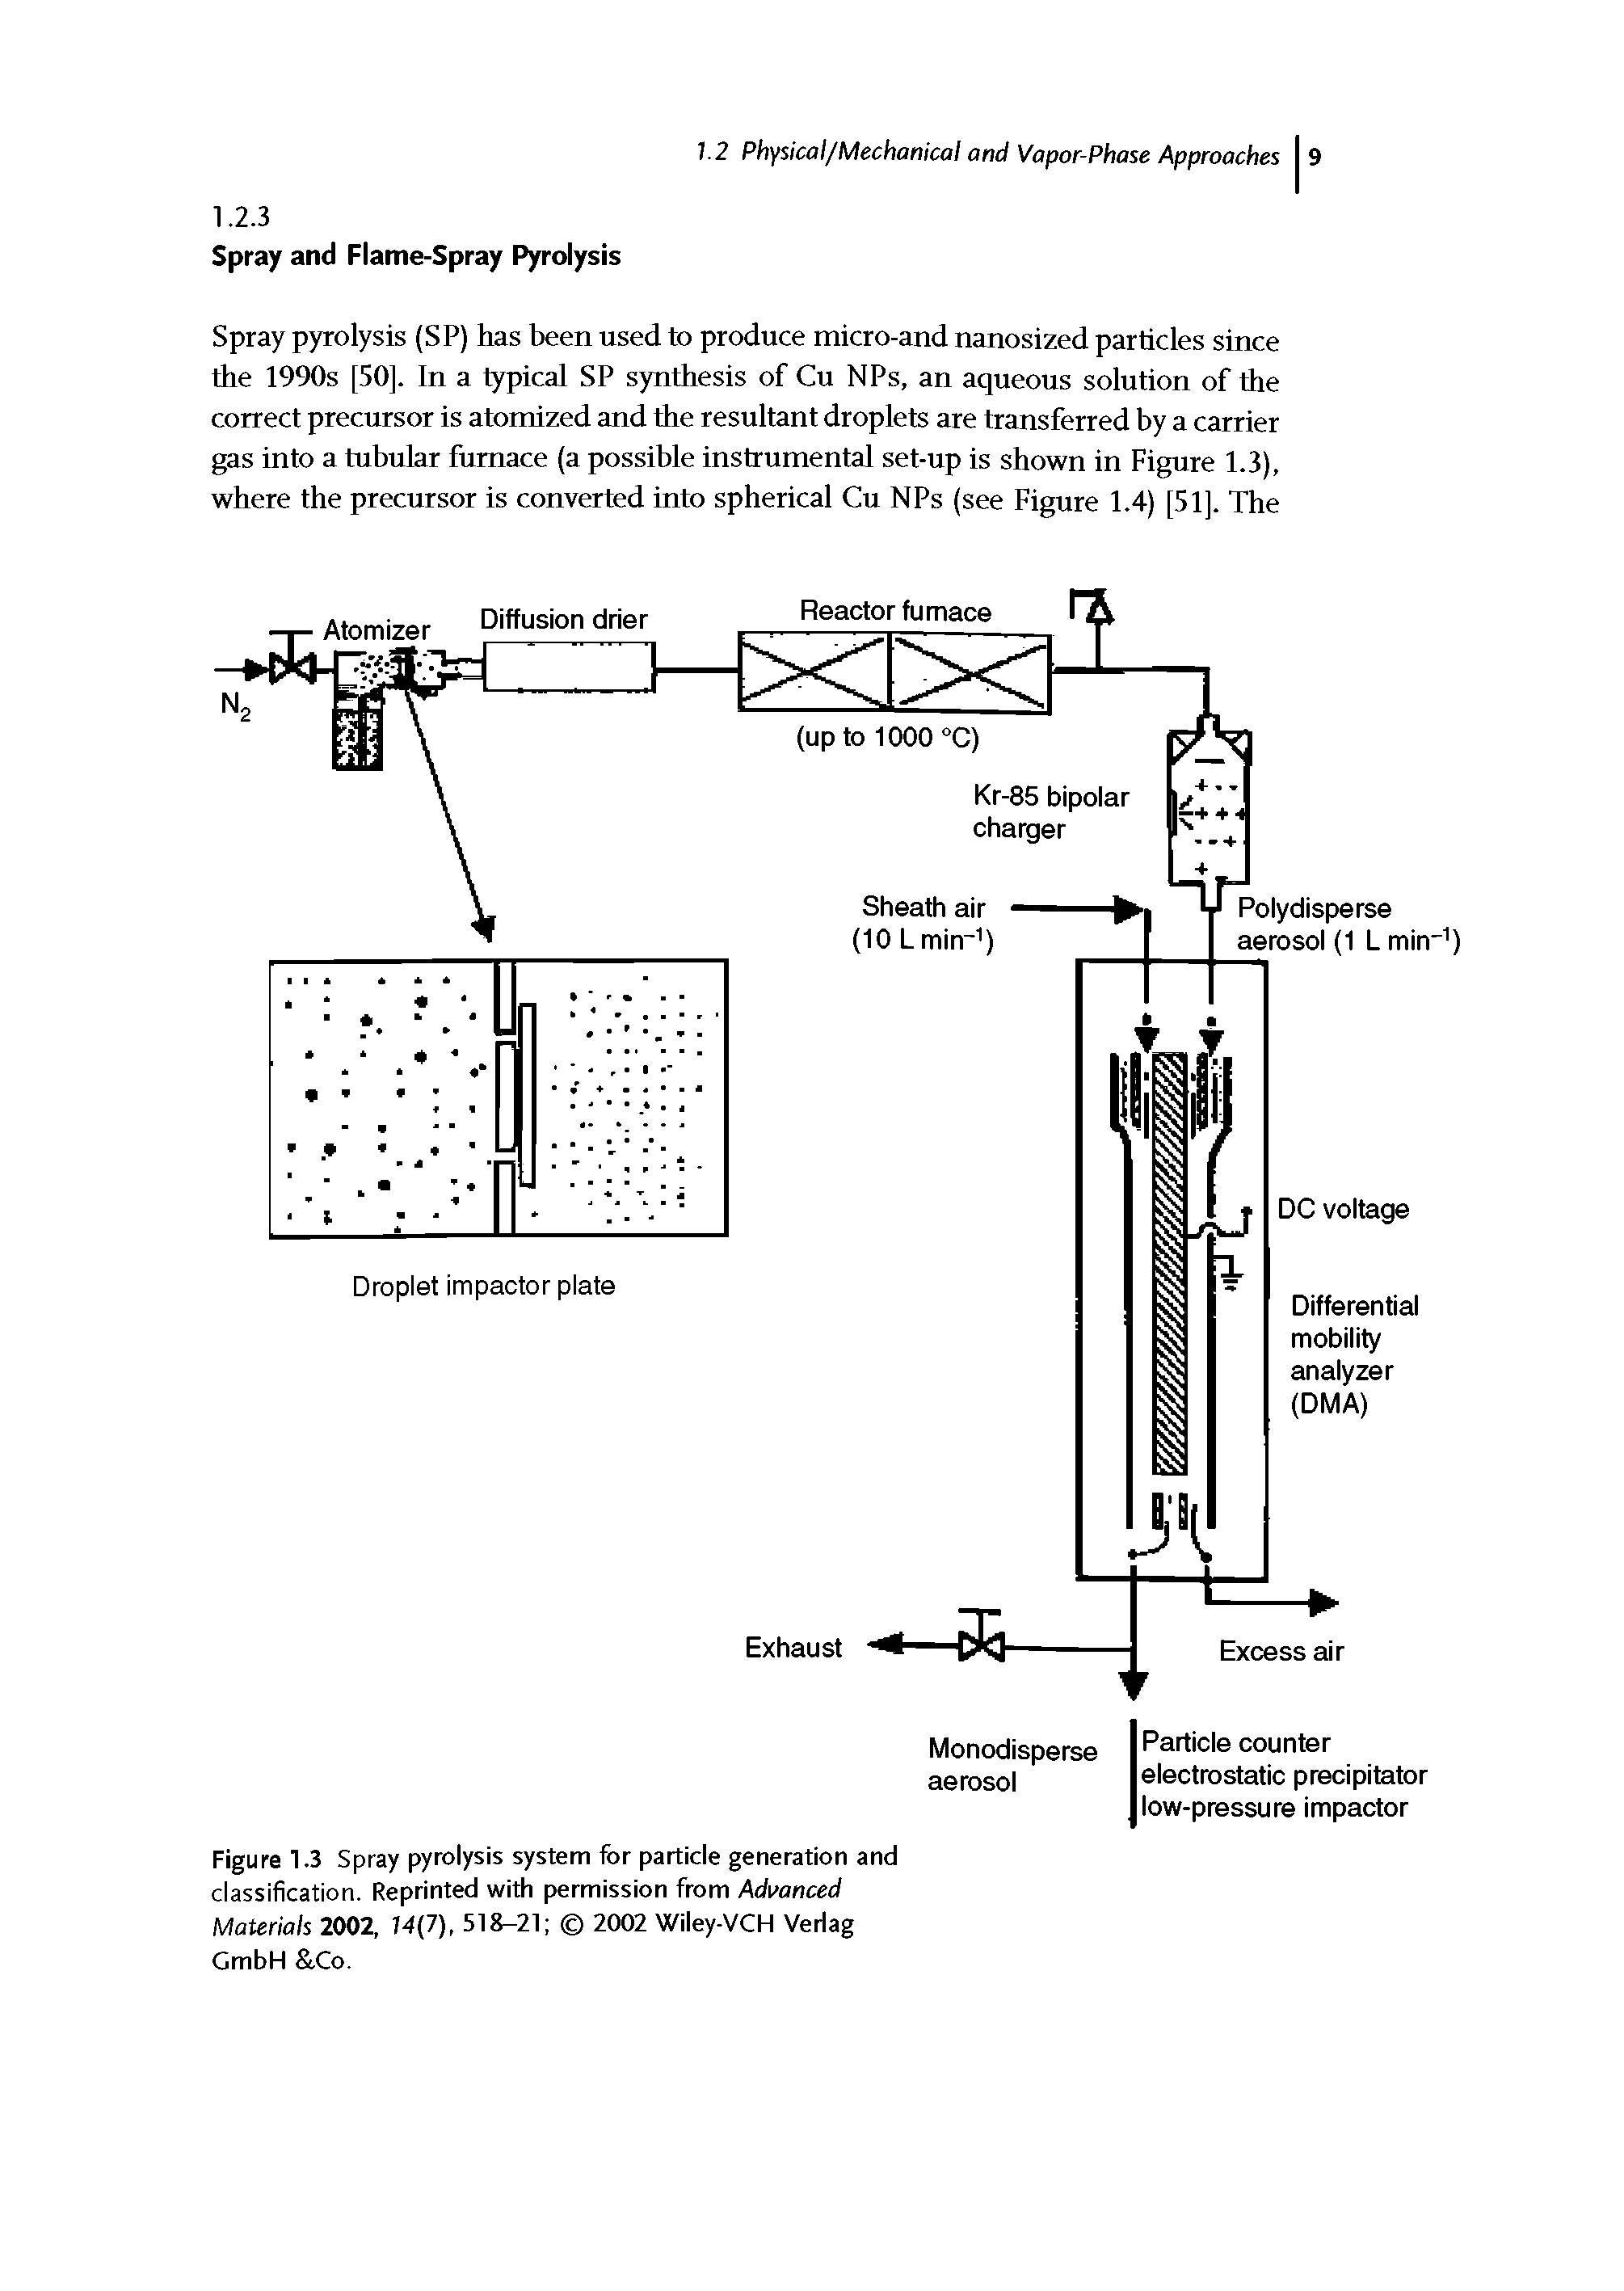 Figure 1.3 Spray pyrolysis system for particle generation and classification. Reprinted with permission from Advanced Materials 2002, 74(7), 518-21 2002 Wiley-VCH Verlag GmbH Co.